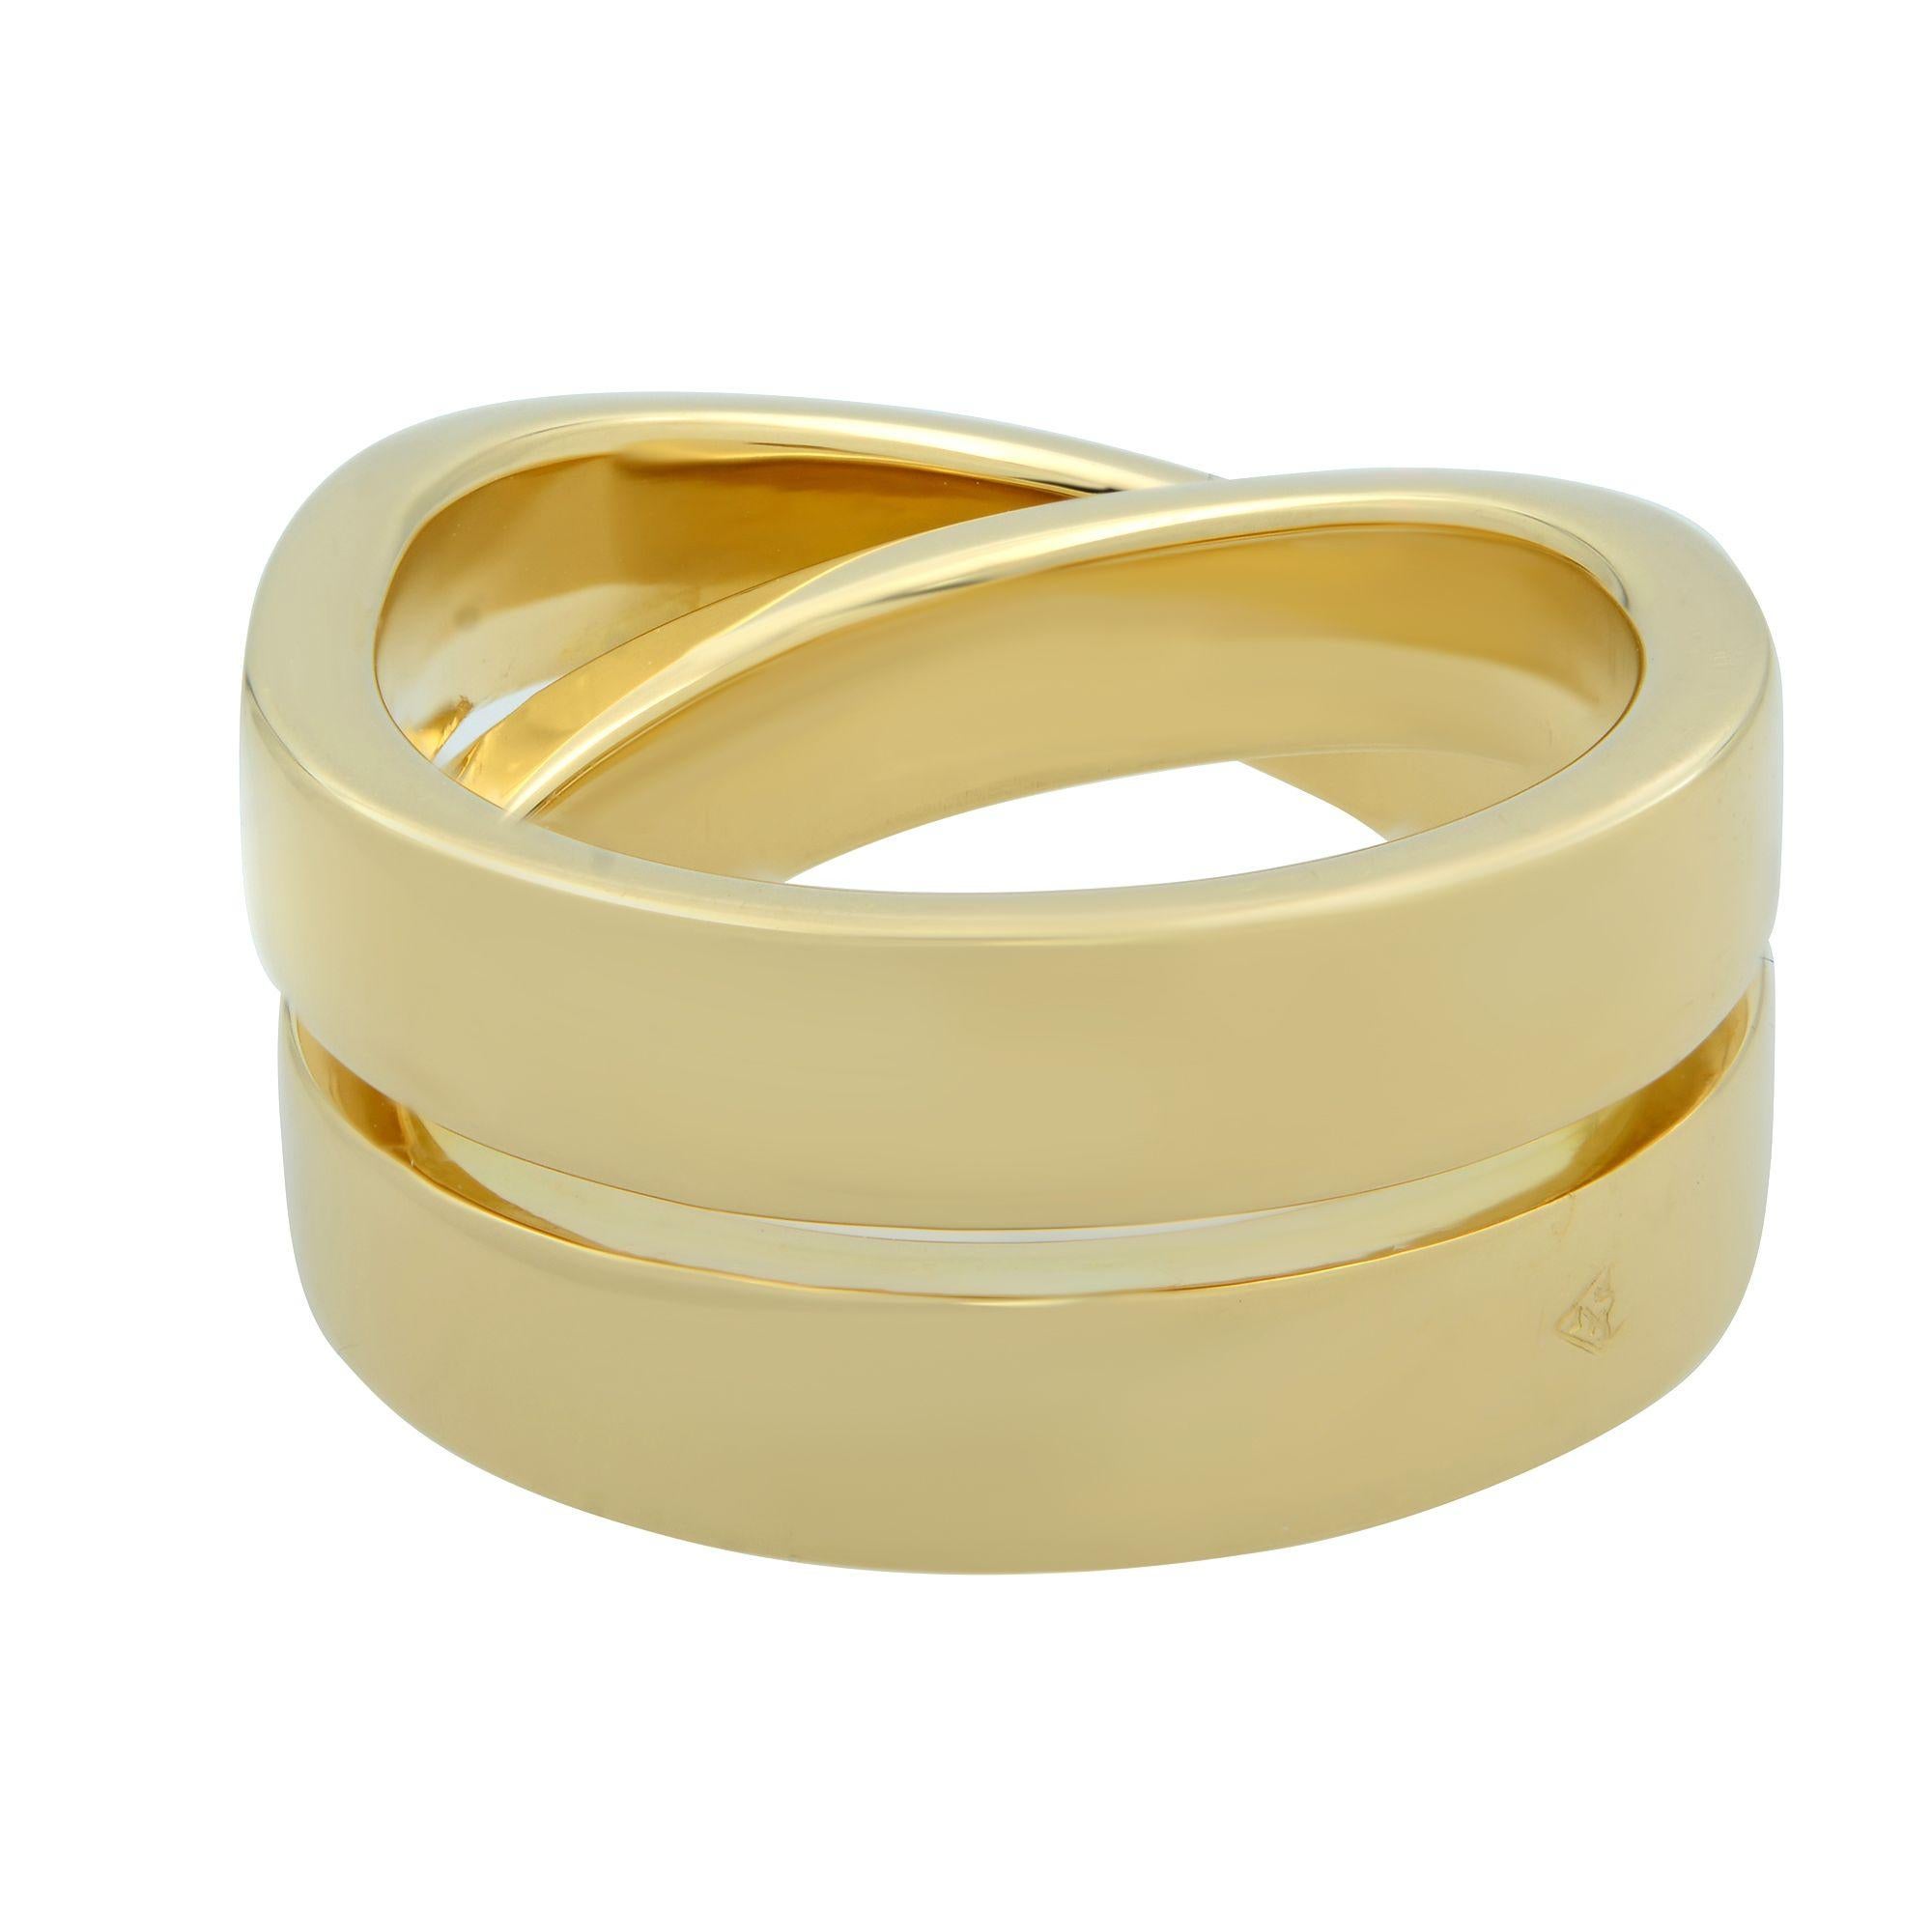 Cartier yellow gold ring from 